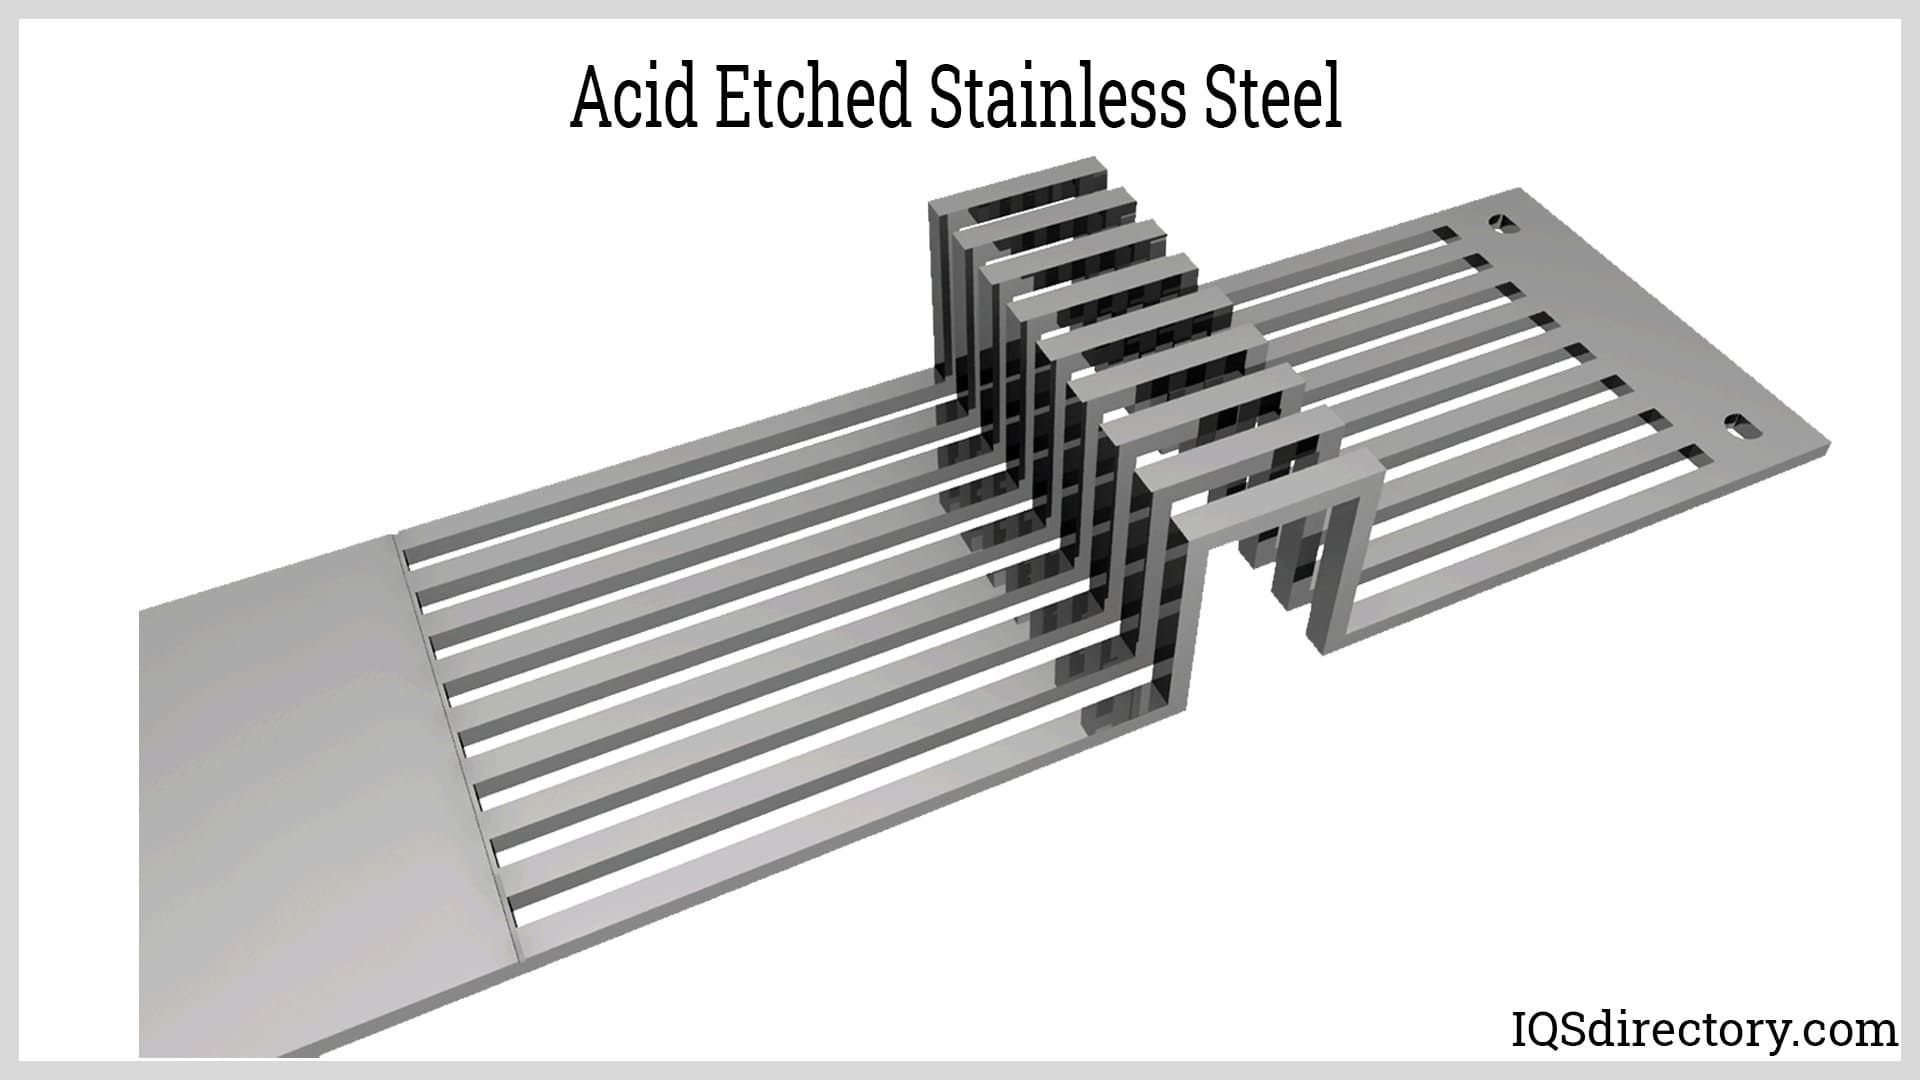 Acid Etched Stainless Steel